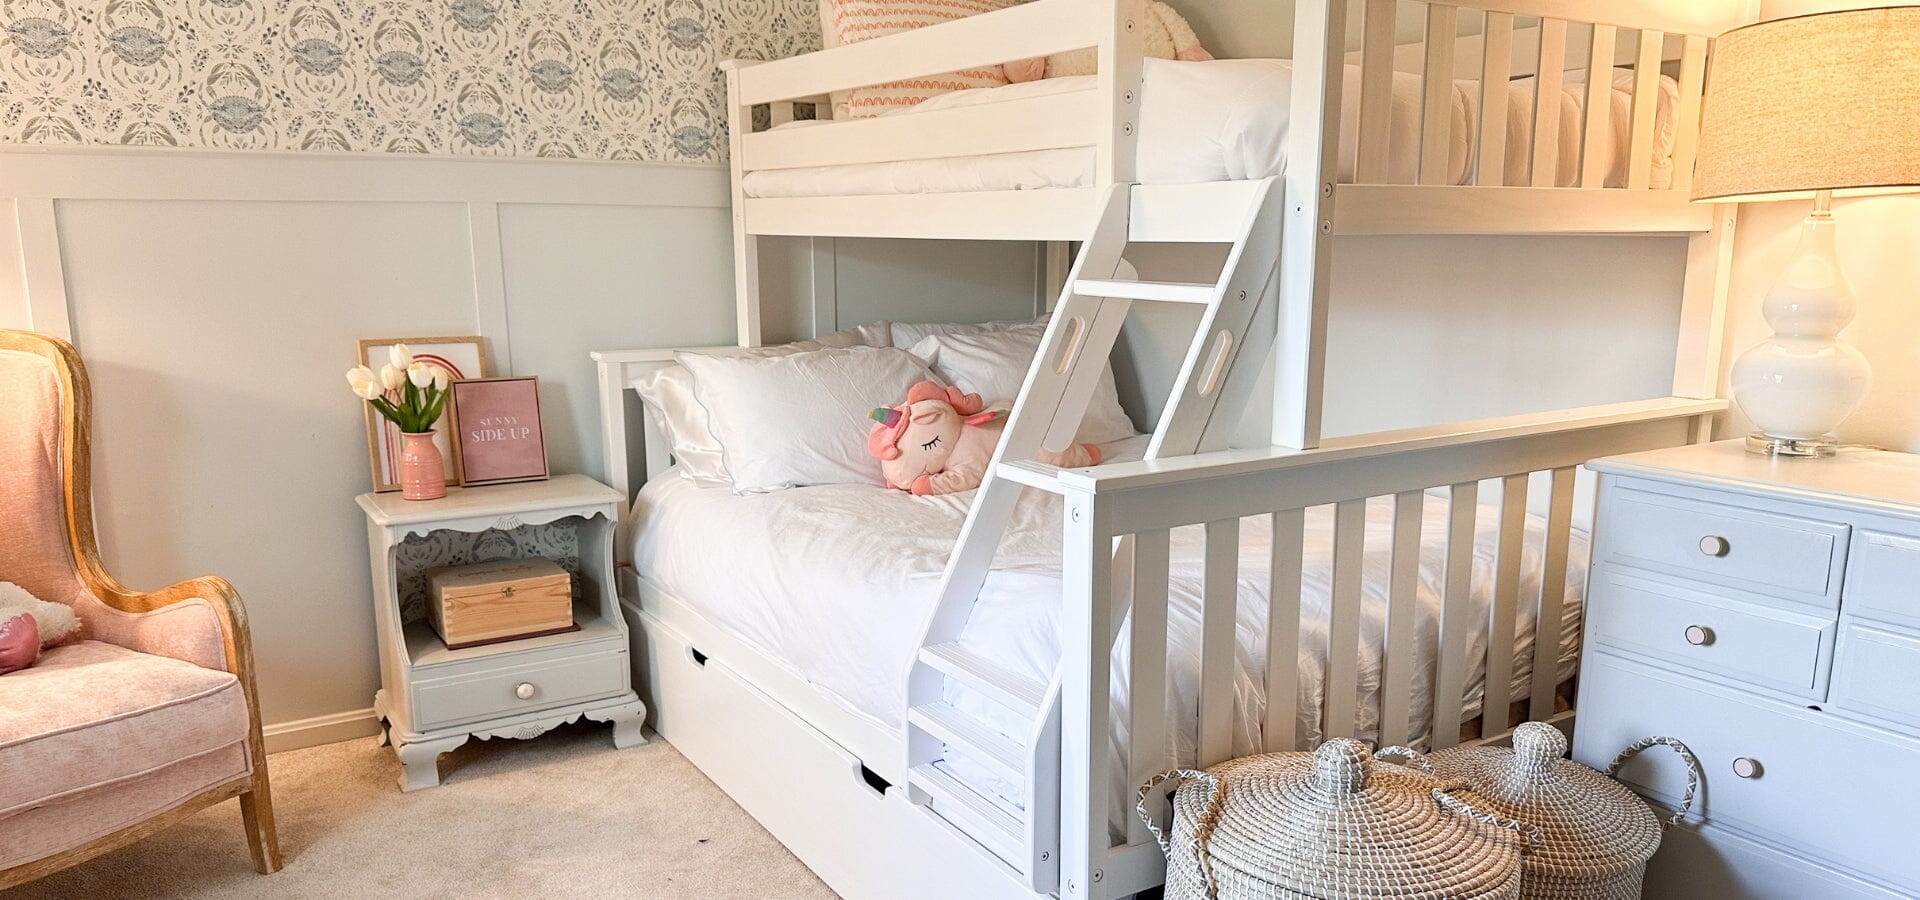 White twin over full bunk bed with trundle, pink chair, baskets, blue nightstands, and blue crab wallpaper